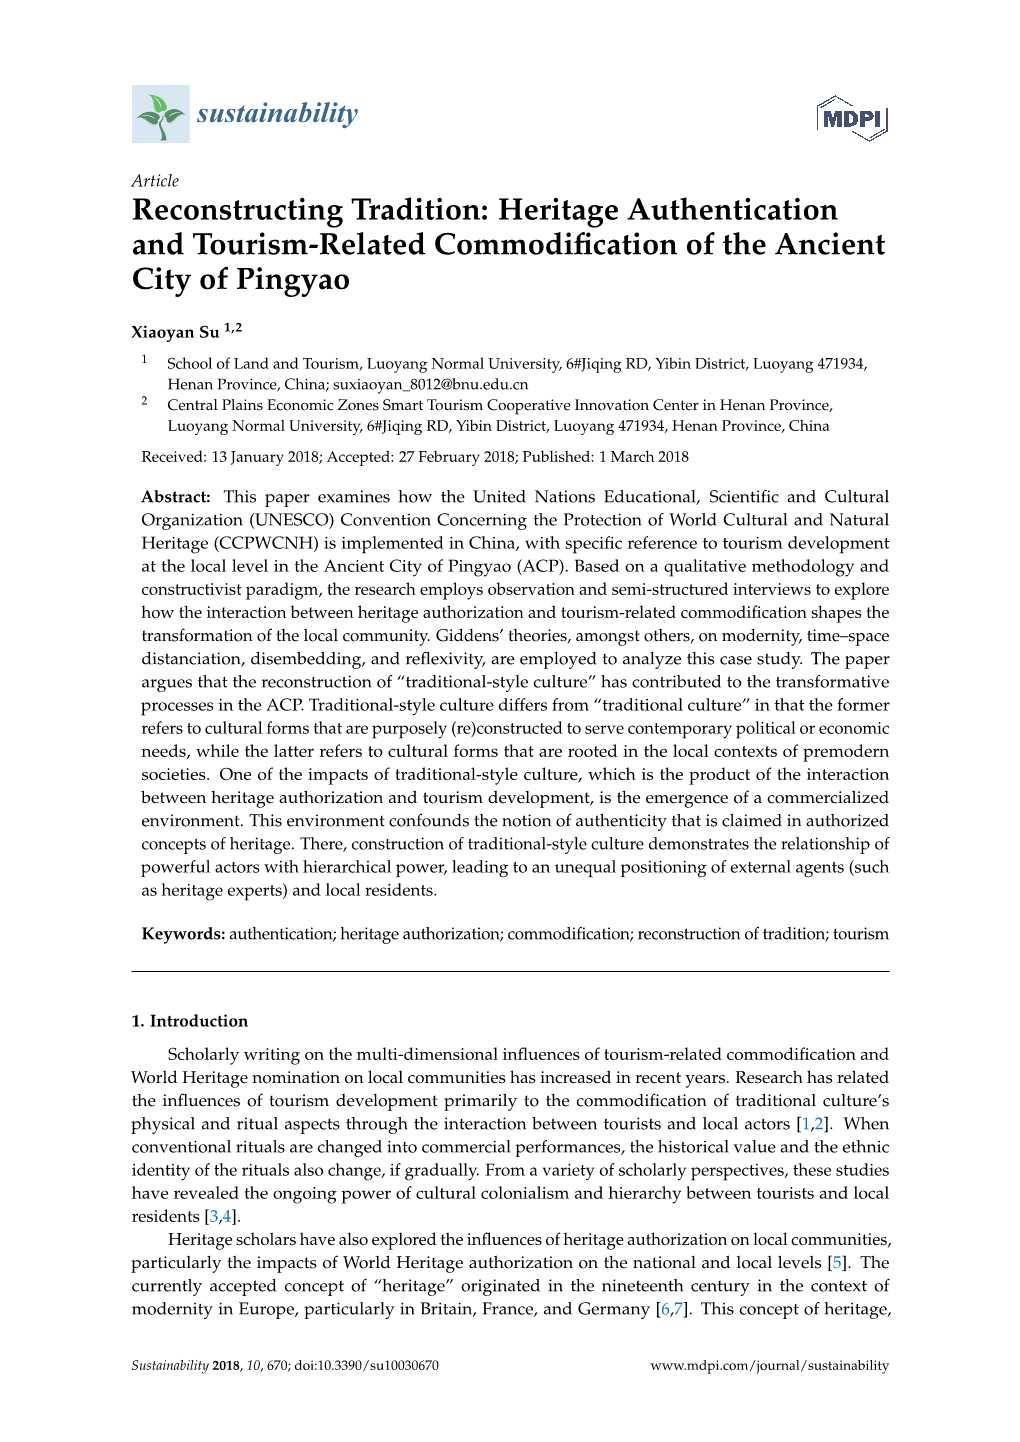 Heritage Authentication and Tourism-Related Commodiﬁcation of the Ancient City of Pingyao